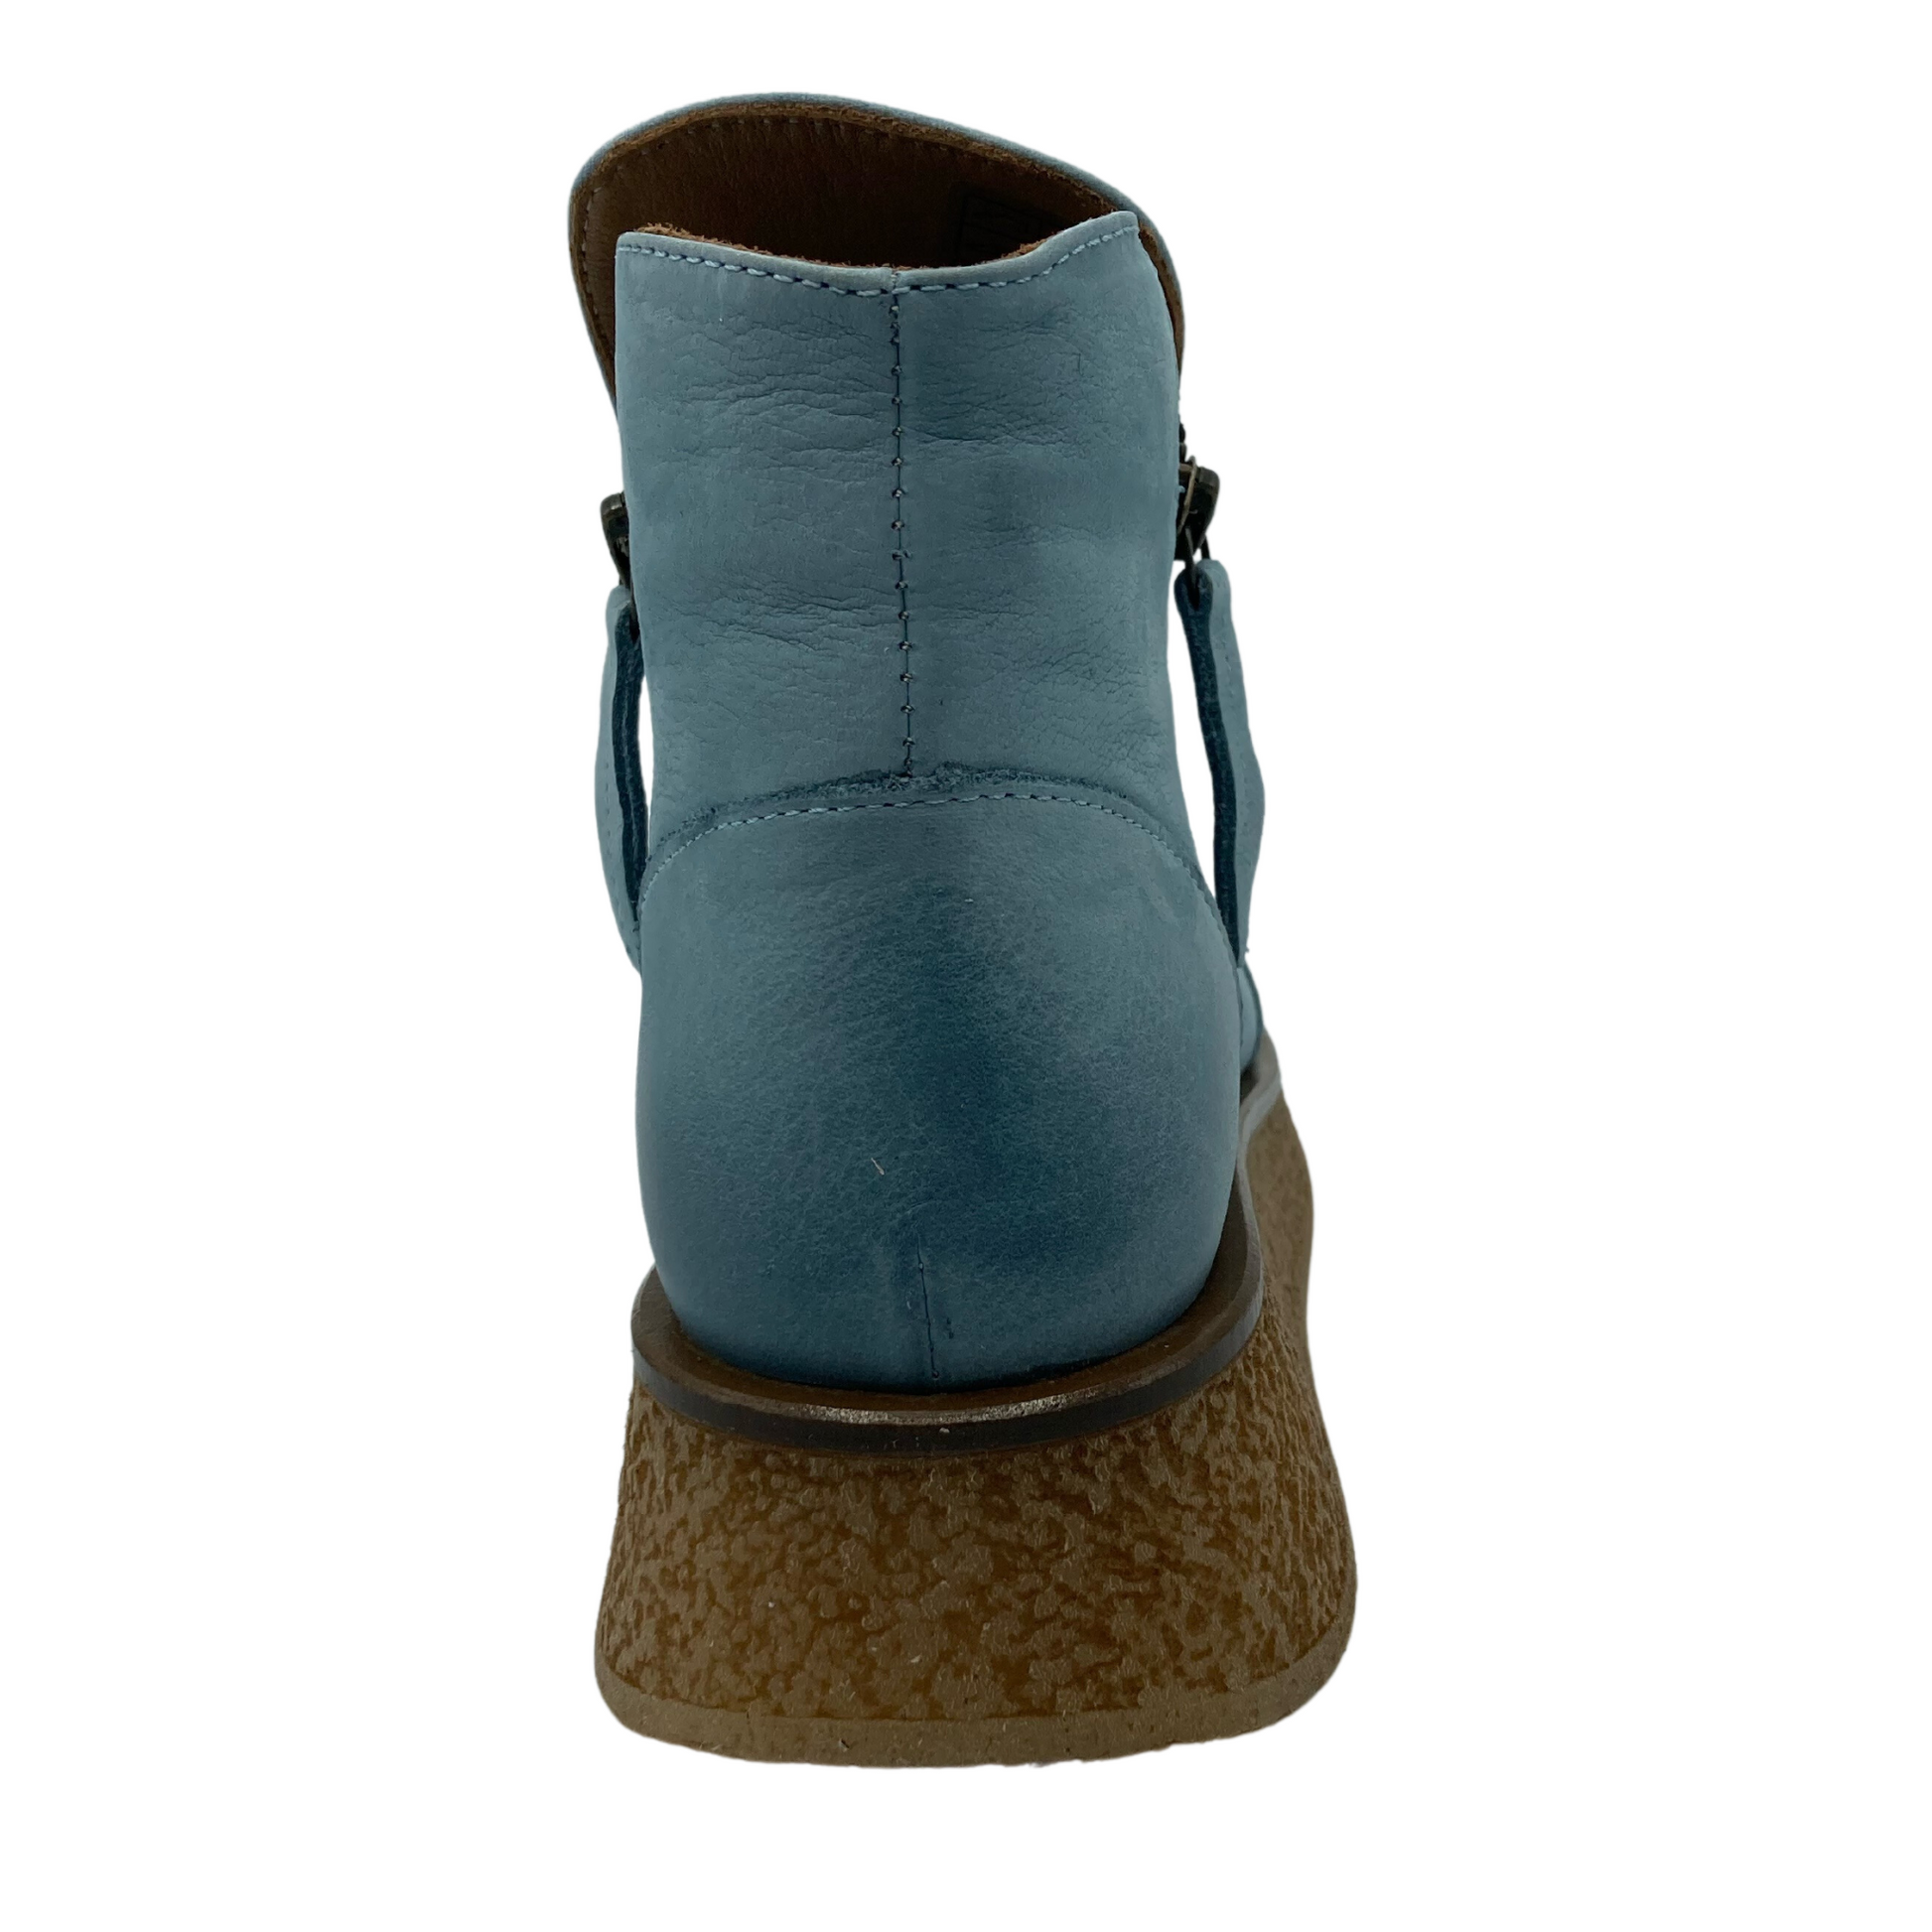 Back view of sky blue ankle boot with platform outsole